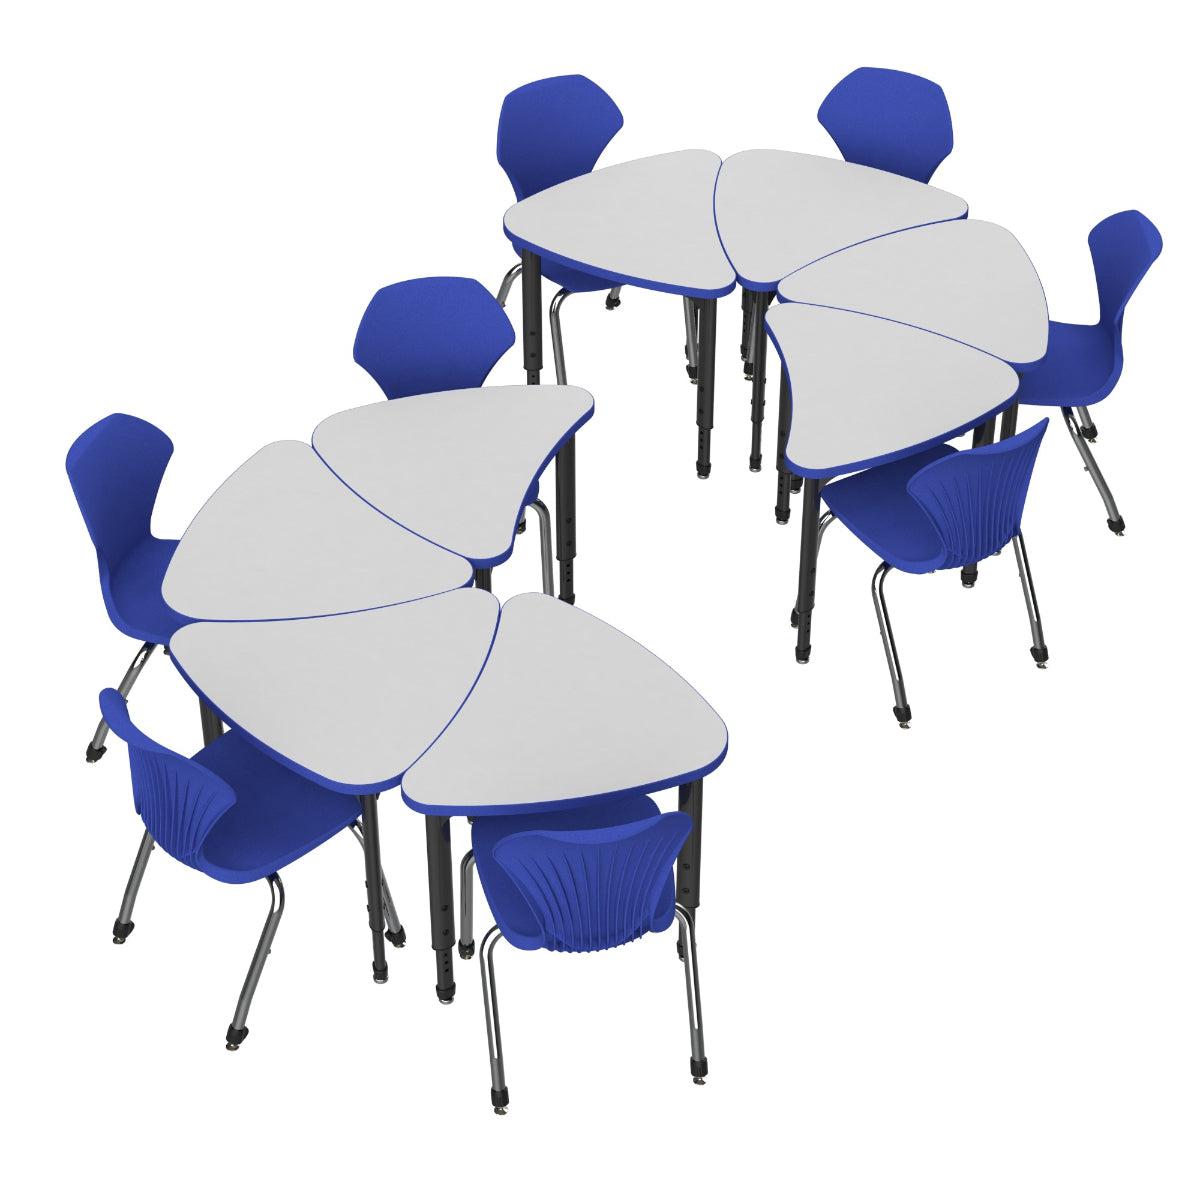 Apex White Dry Erase Classroom Desk and Chair Package, 8 Small Chevron Collaborative Student Desks with 8 Apex Stack Chairs